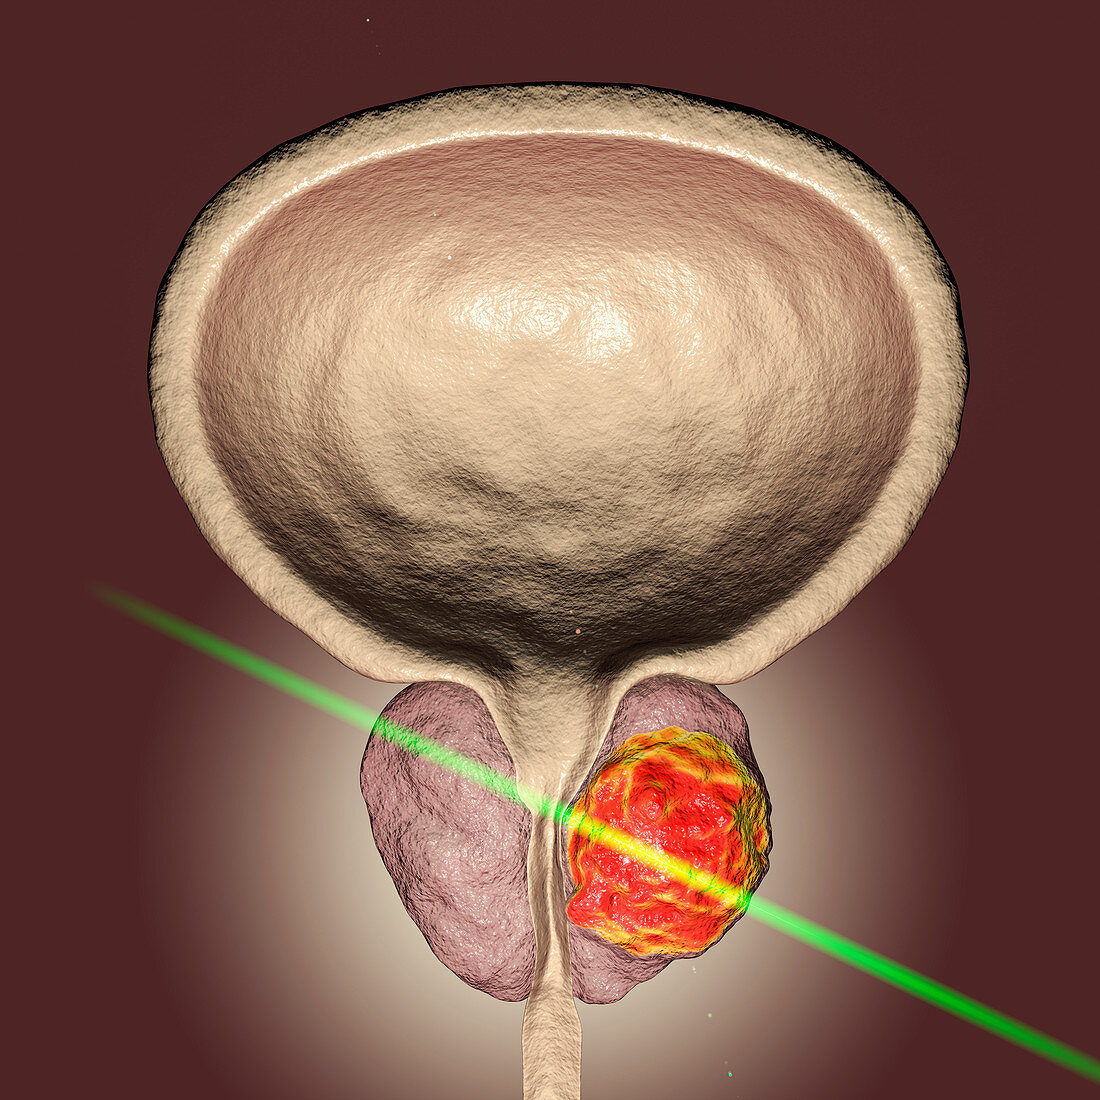 Laserotherapy of prostate cancer, conceptual illustration